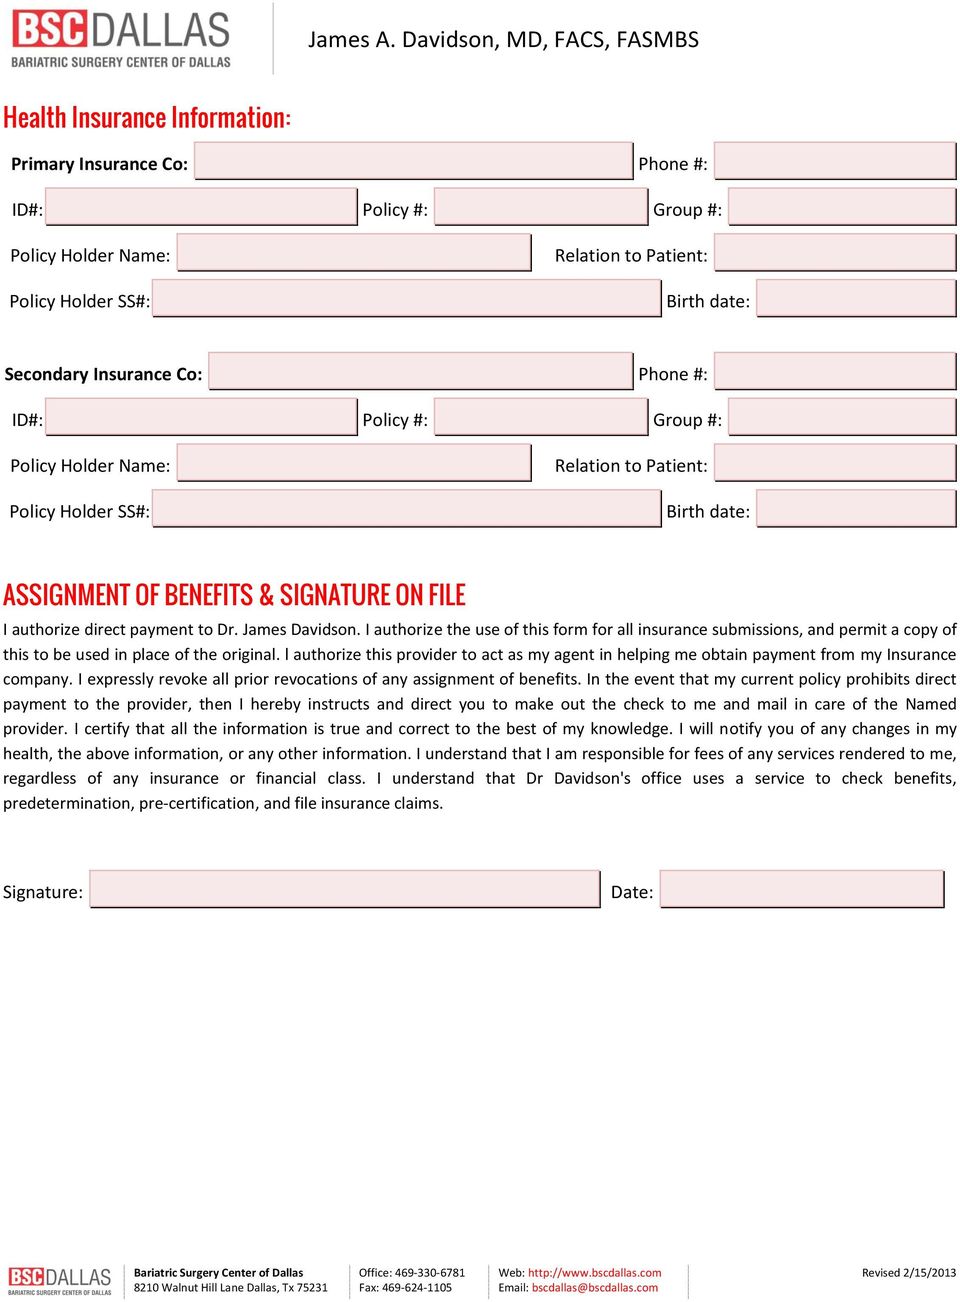 I authorize the use of this form for all insurance submissions, and permit a copy of this to be used in place of the original.